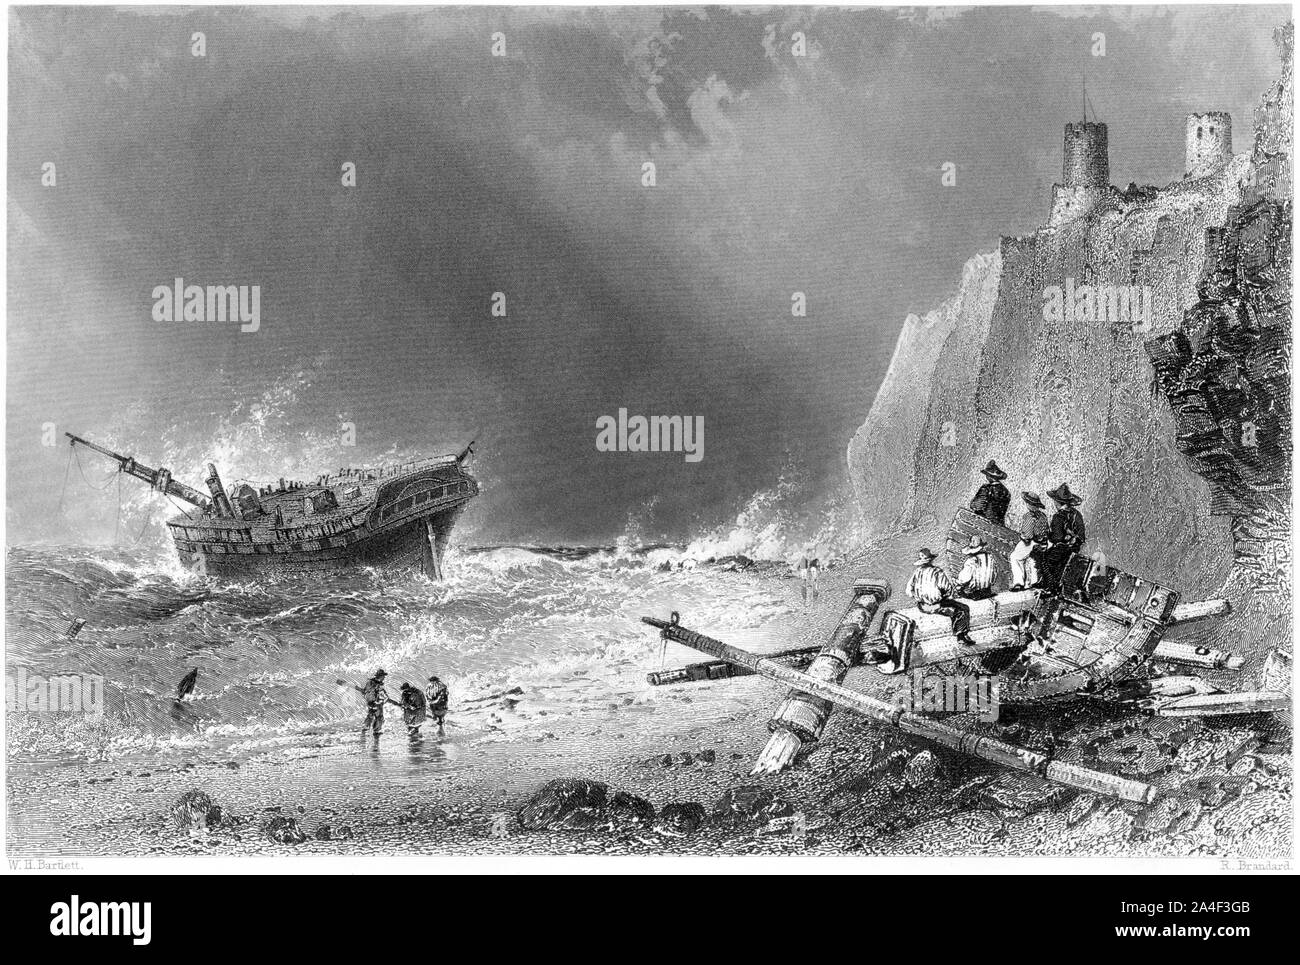 An engraving of a Wreck in Kingsgate Bay (Isle of Thanet) UK scanned at high resolution from a book printed in 1842.  Believed copyright free. Stock Photo